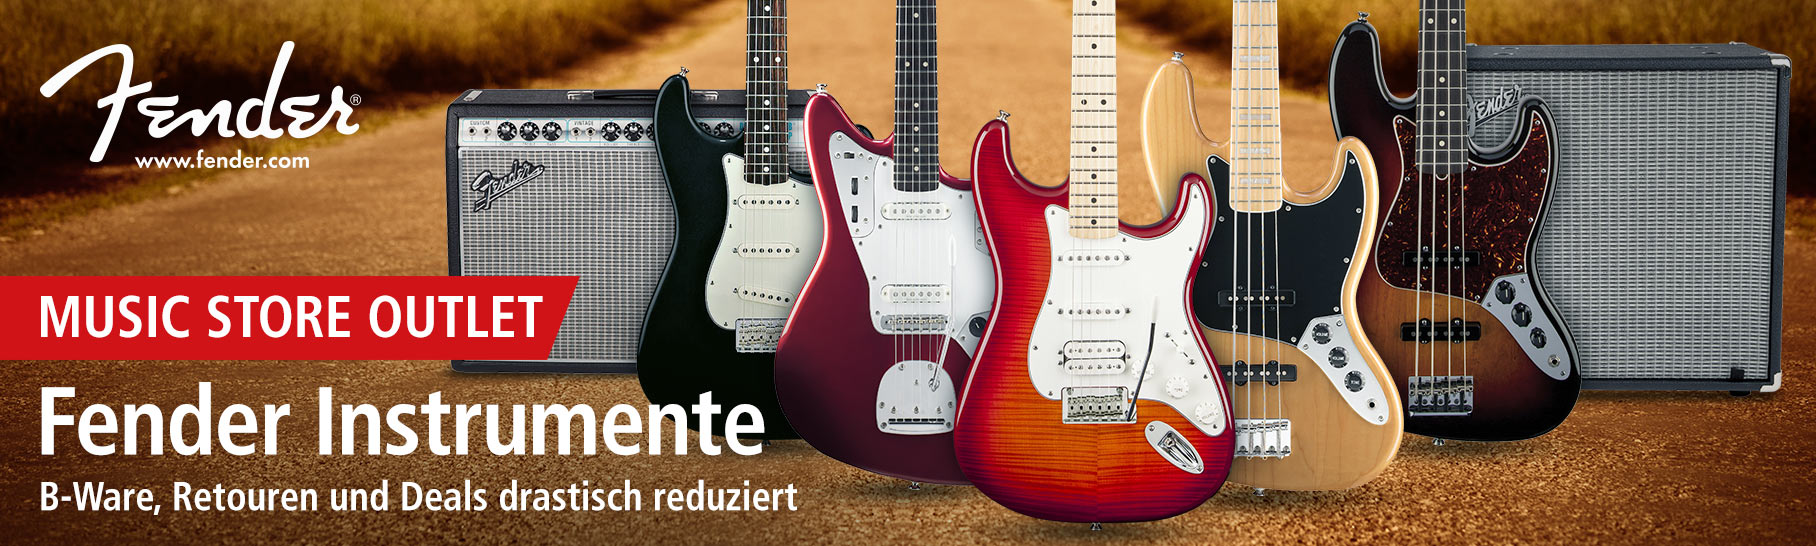 MUSIC STORE Fender Outlet | MUSIC STORE professional